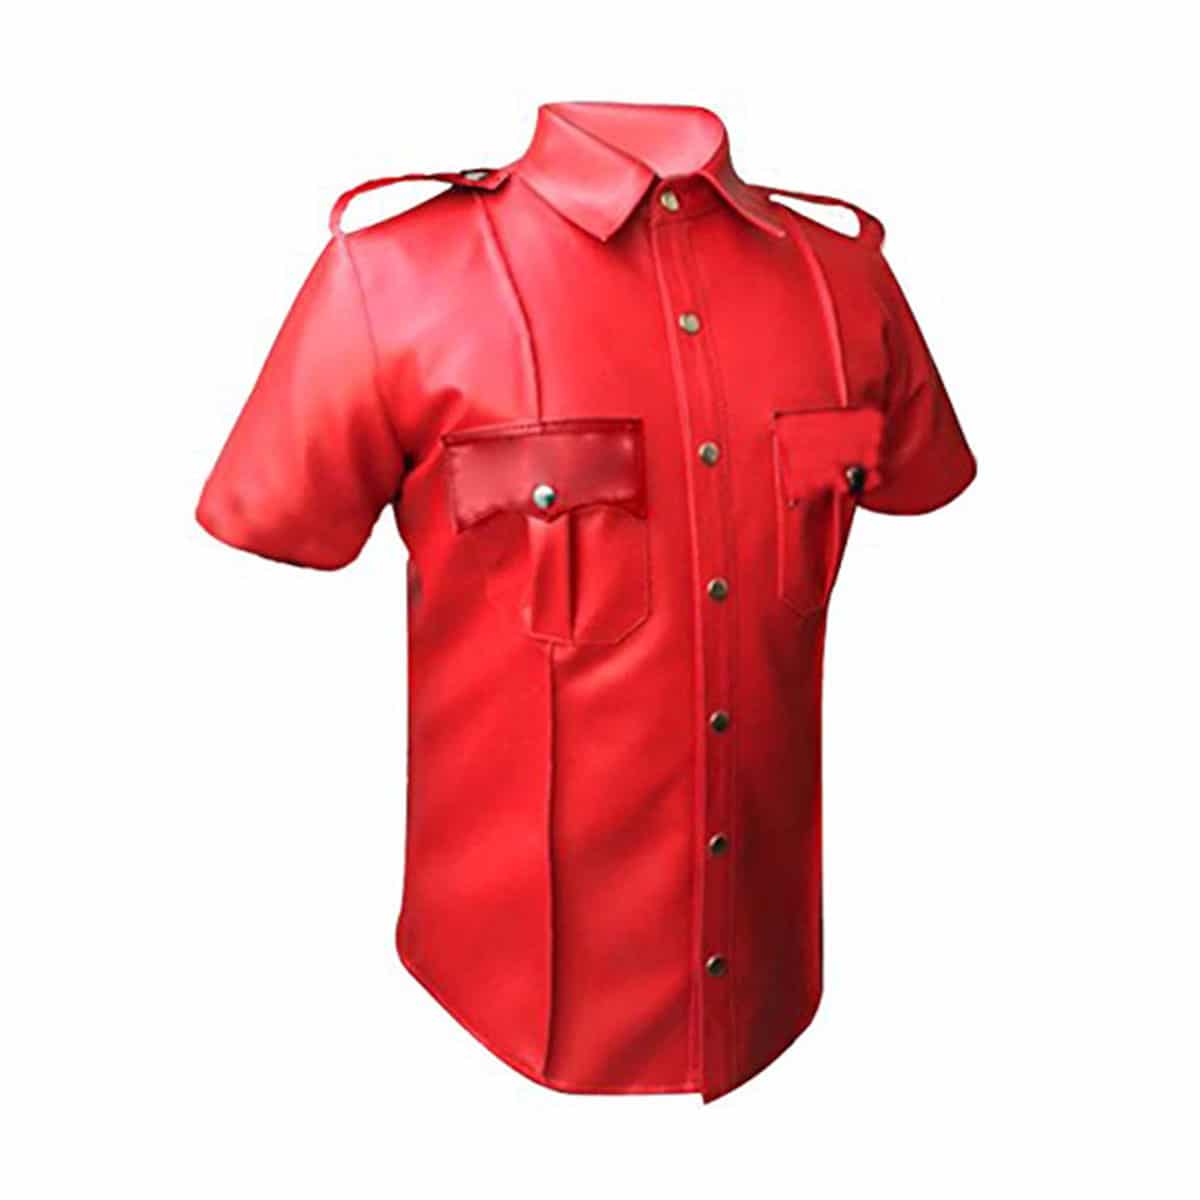 Mens Cow or Sheep Red Leather Police Uniform Style Shirt - (PSHS-RED)